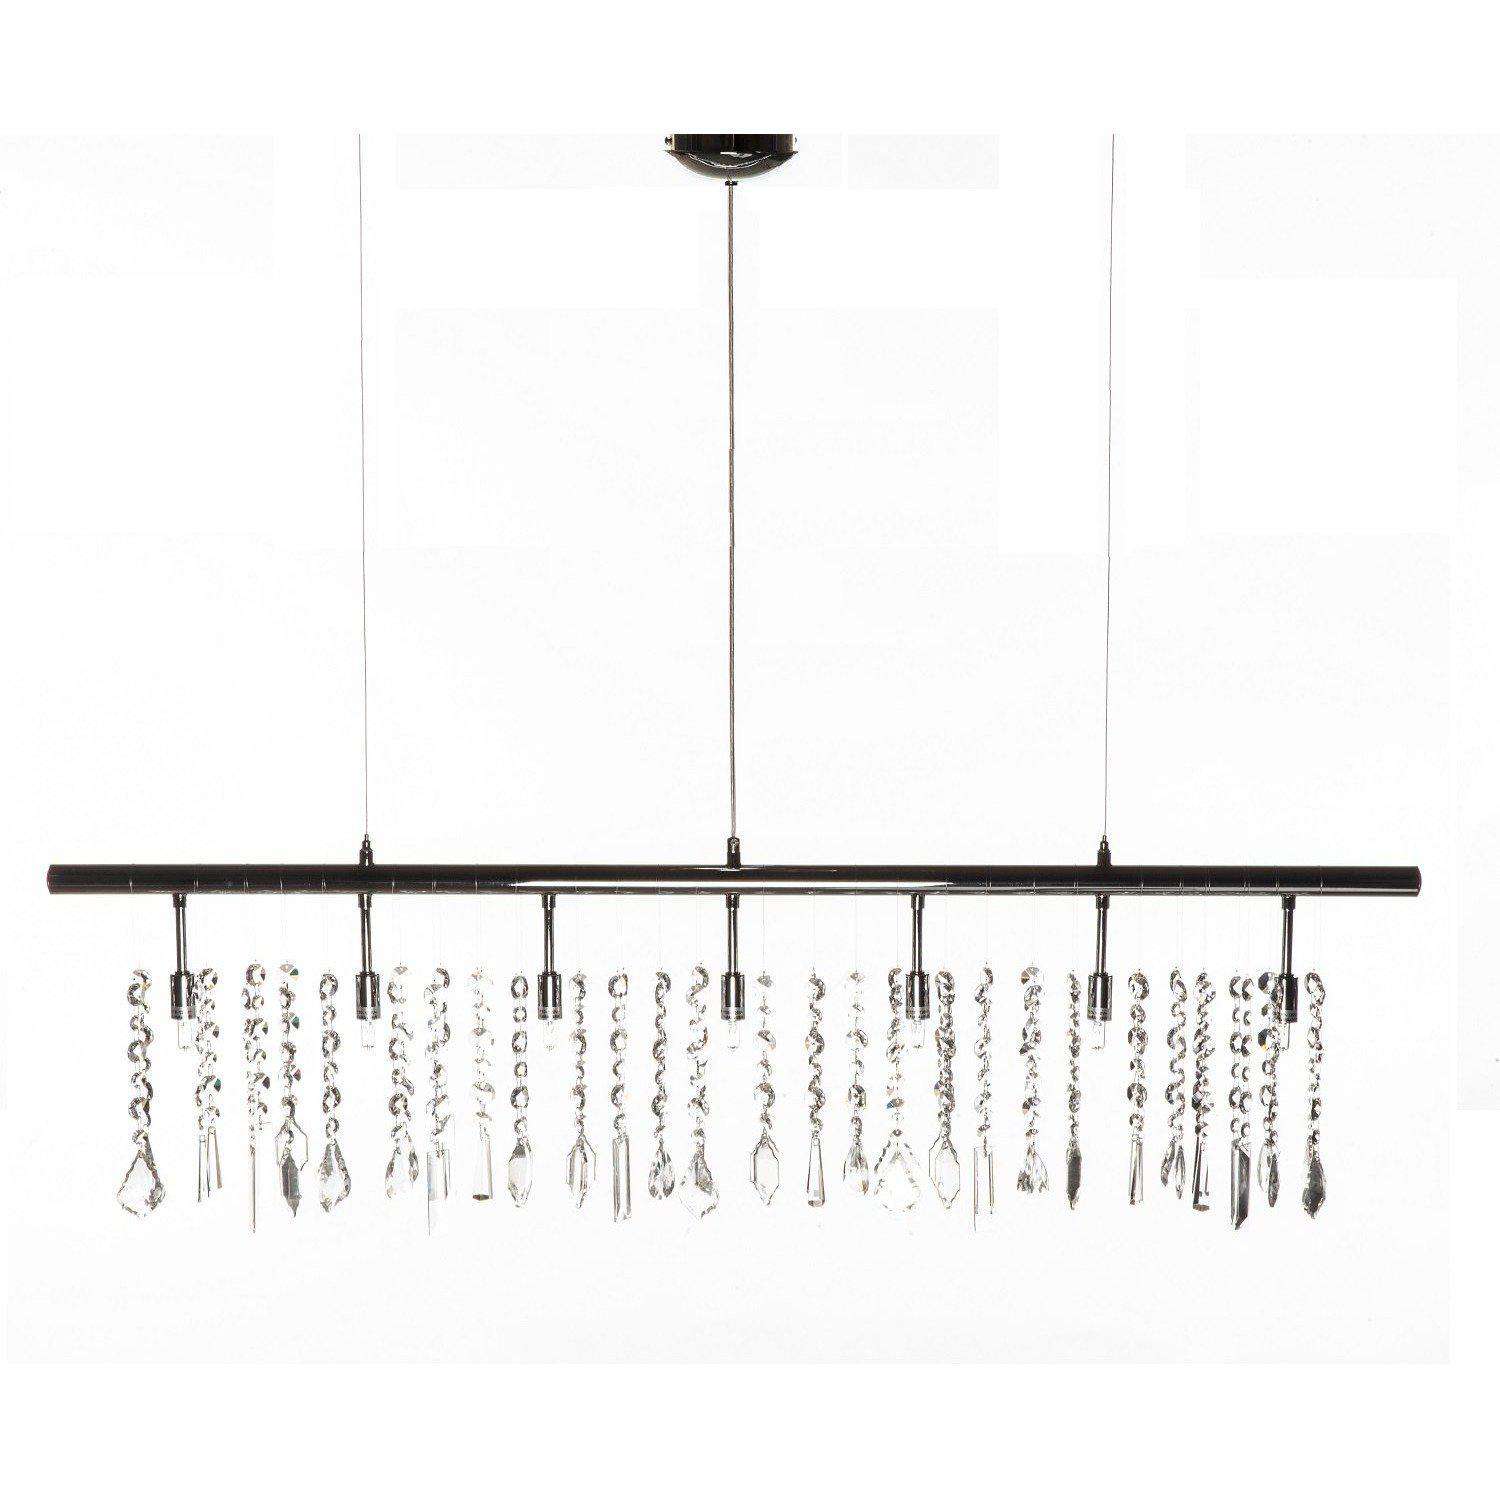 The Glamorous Linear Crystal Suspension Light-France & Son-LS30181-Chandeliers-1-France and Son